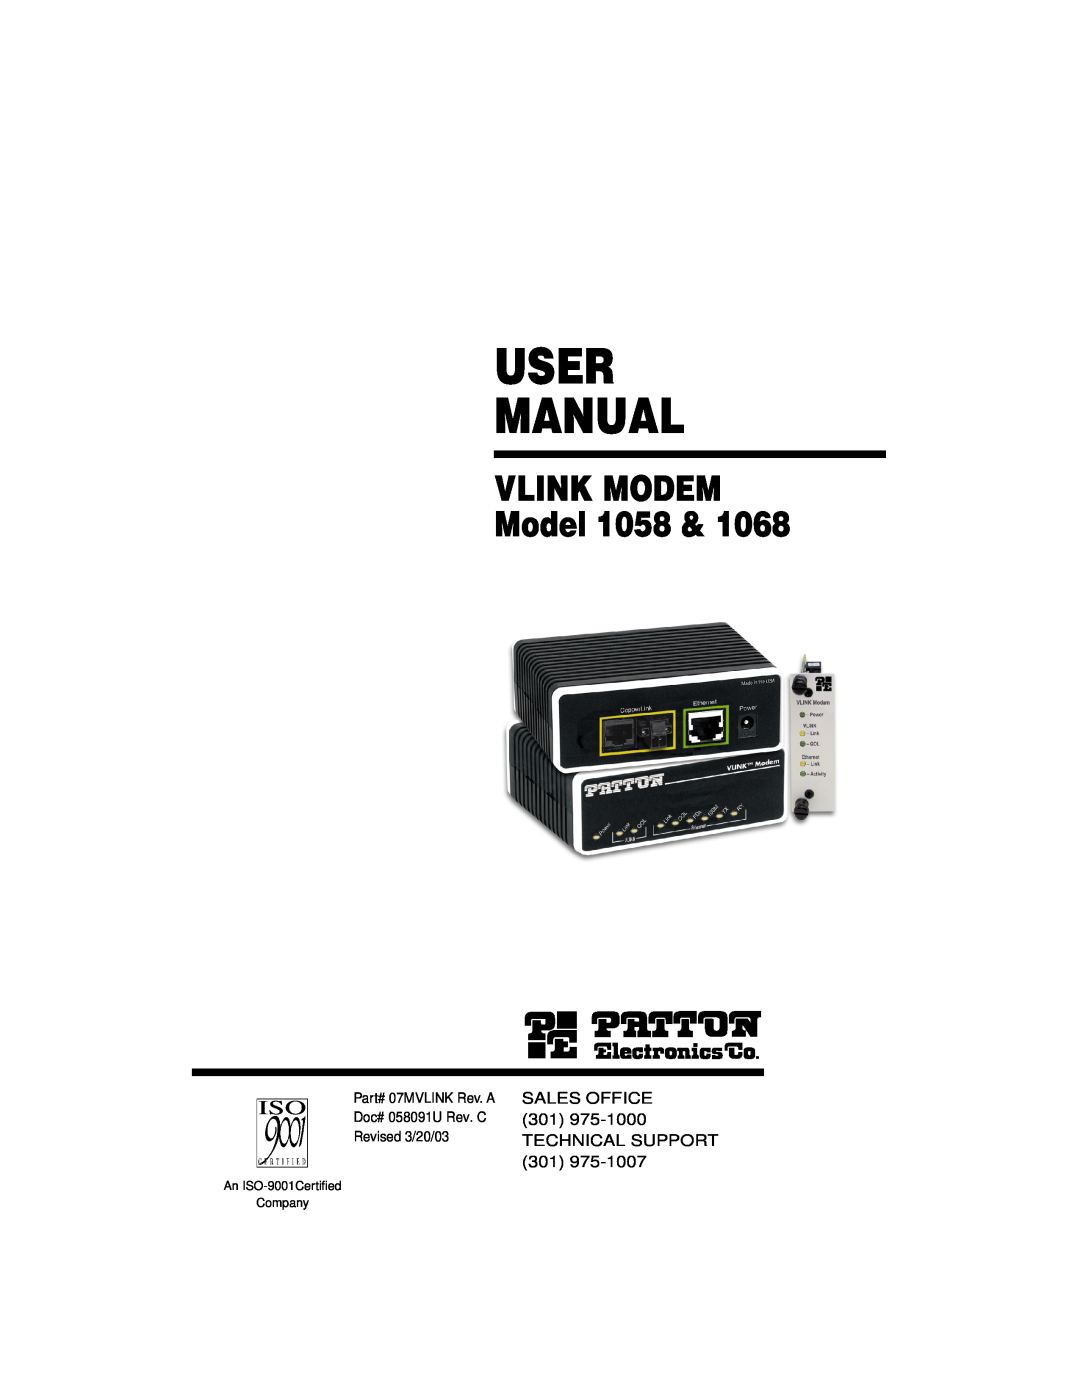 Patton electronic user manual User Manual, VLINK MODEM Model 1058, An ISO-9001Certiﬁed Company 